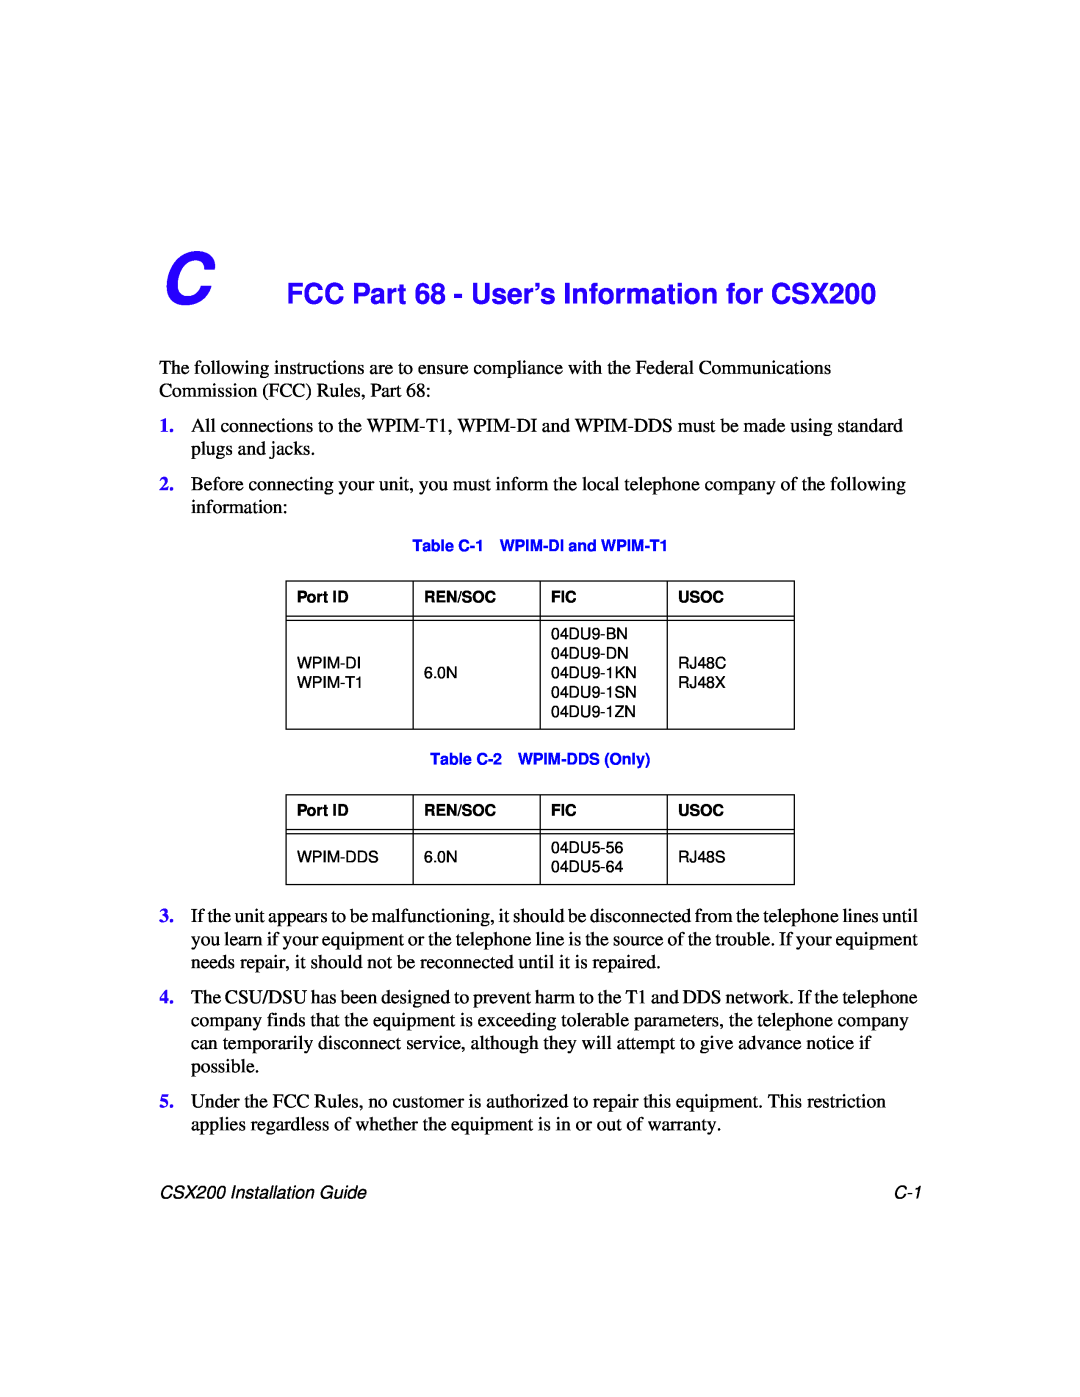 Cabletron Systems C FCC Part 68 - User’s Information for CSX200, Table C-1 WPIM-DI and WPIM-T1, Table C-2 WPIM-DDS Only 